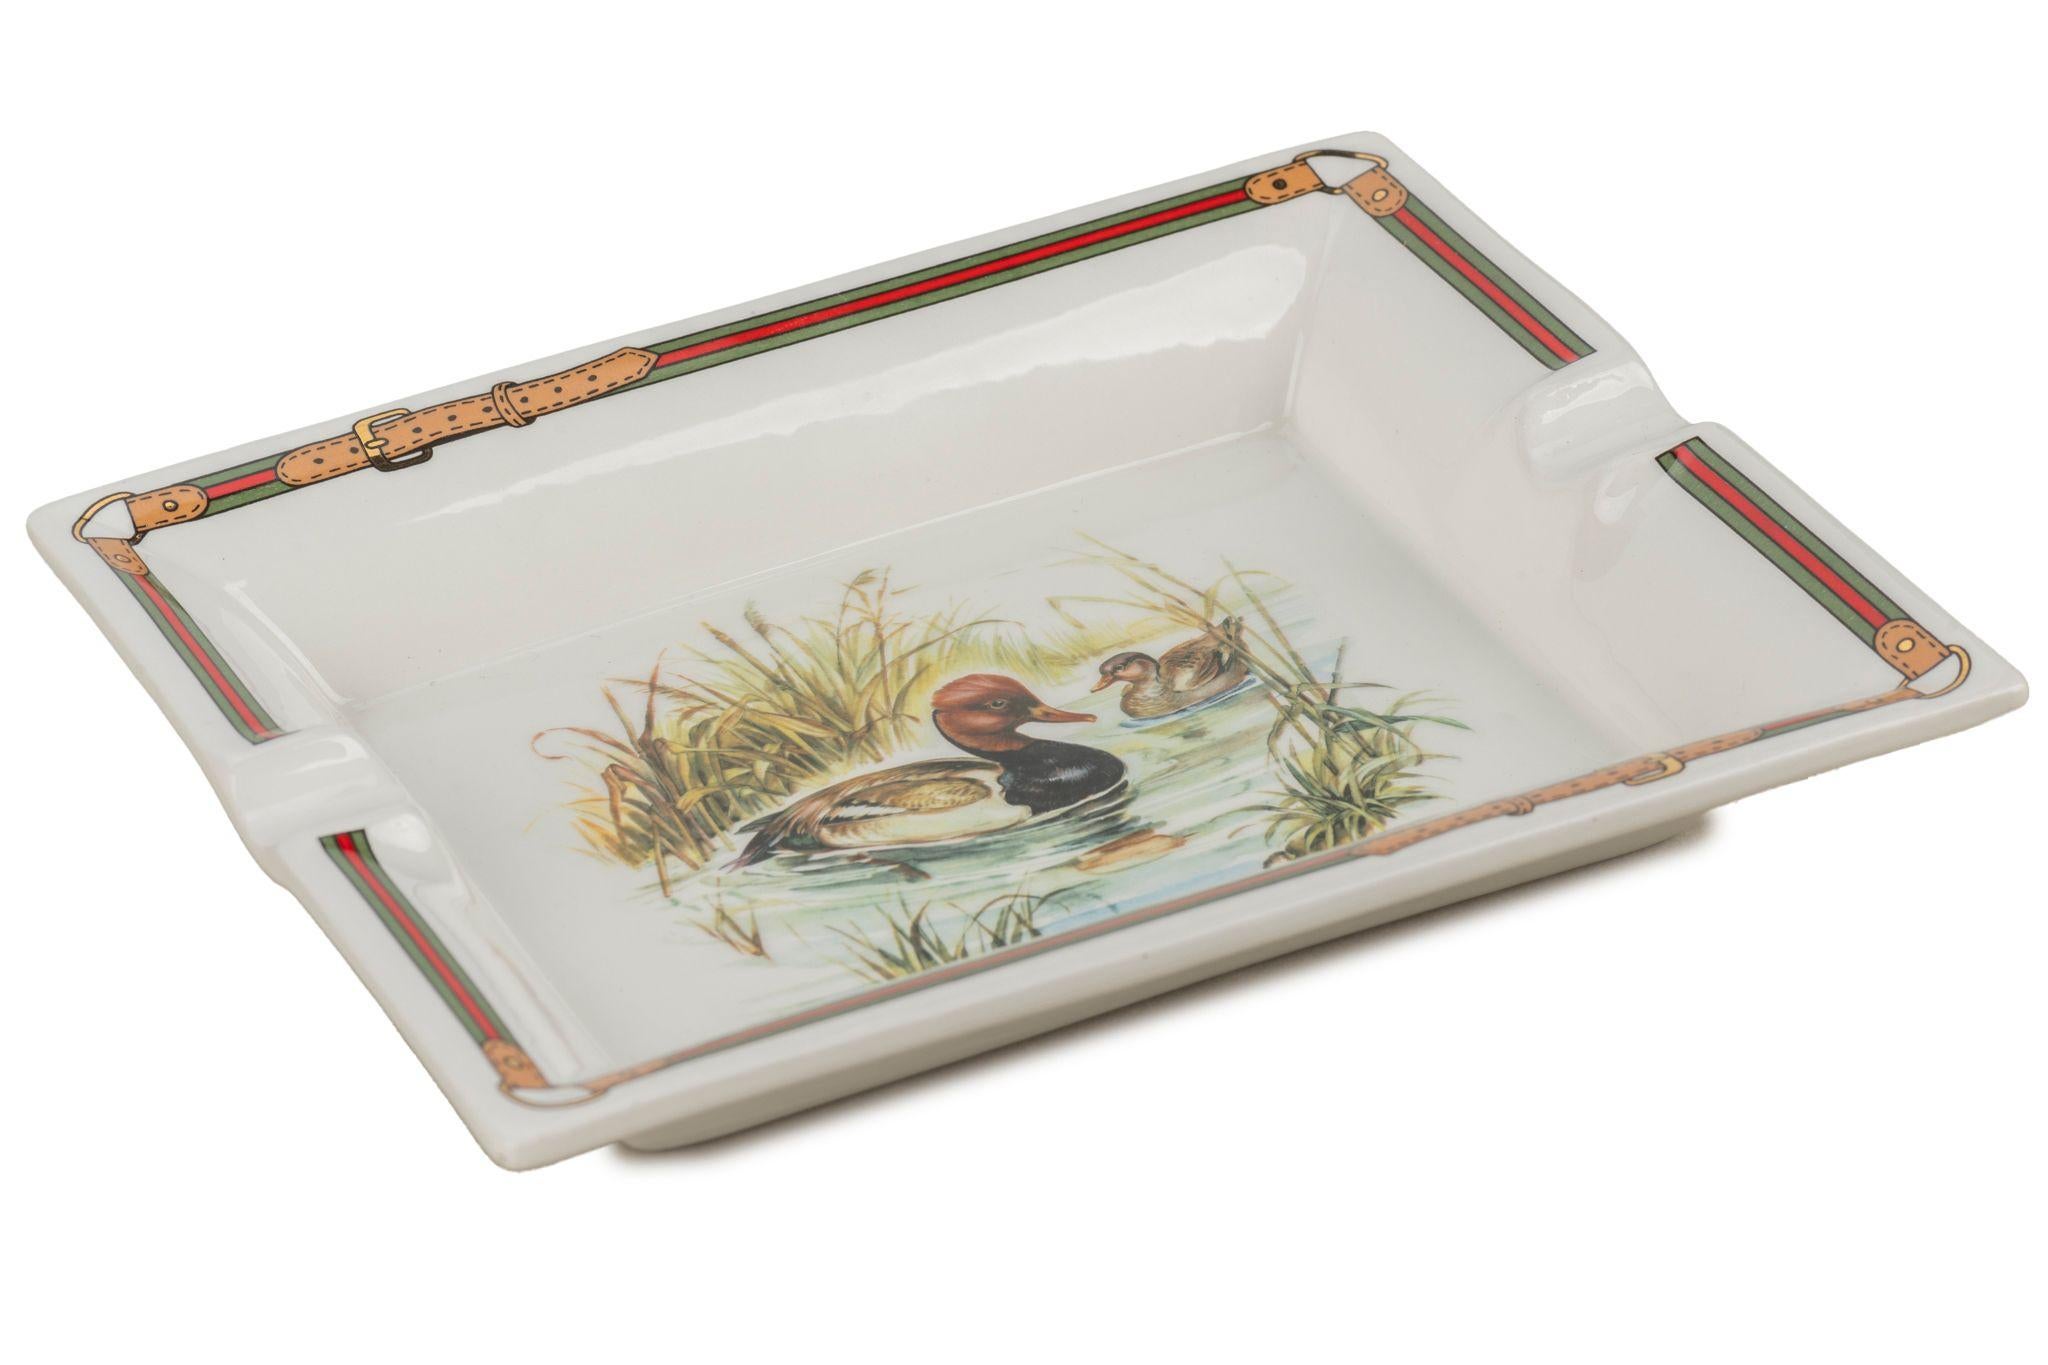 Gucci vintage porcelain ashtray with ducks design, signature red and green trim. Excellent condition.